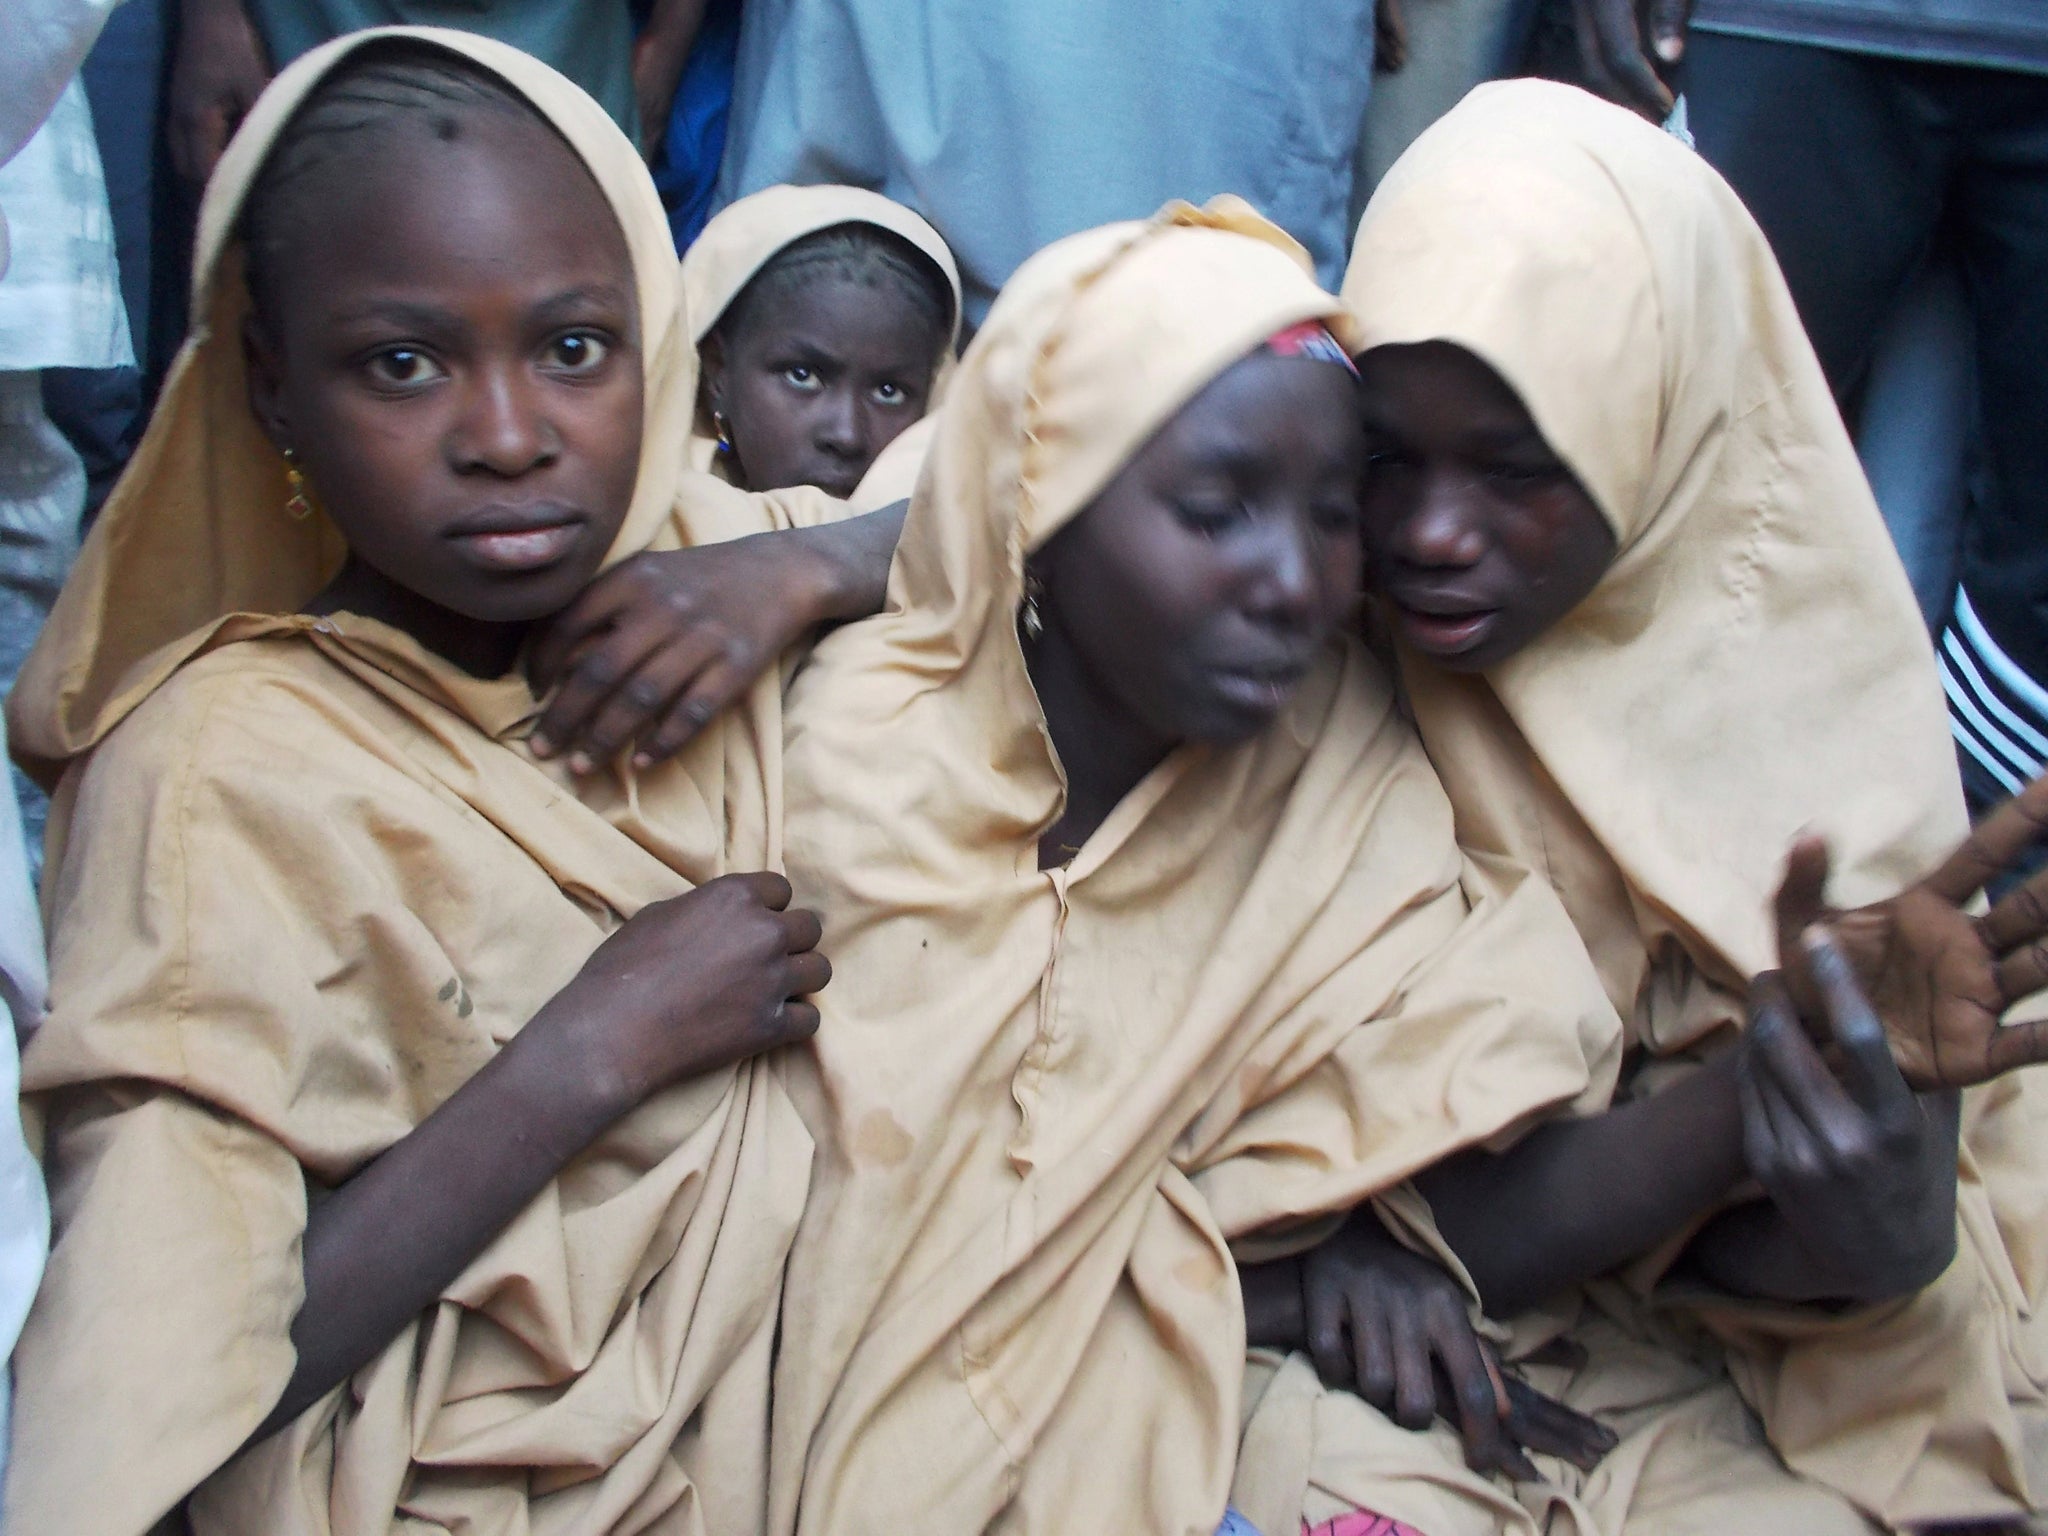 Some of the newly released Dapchi schoolgirls